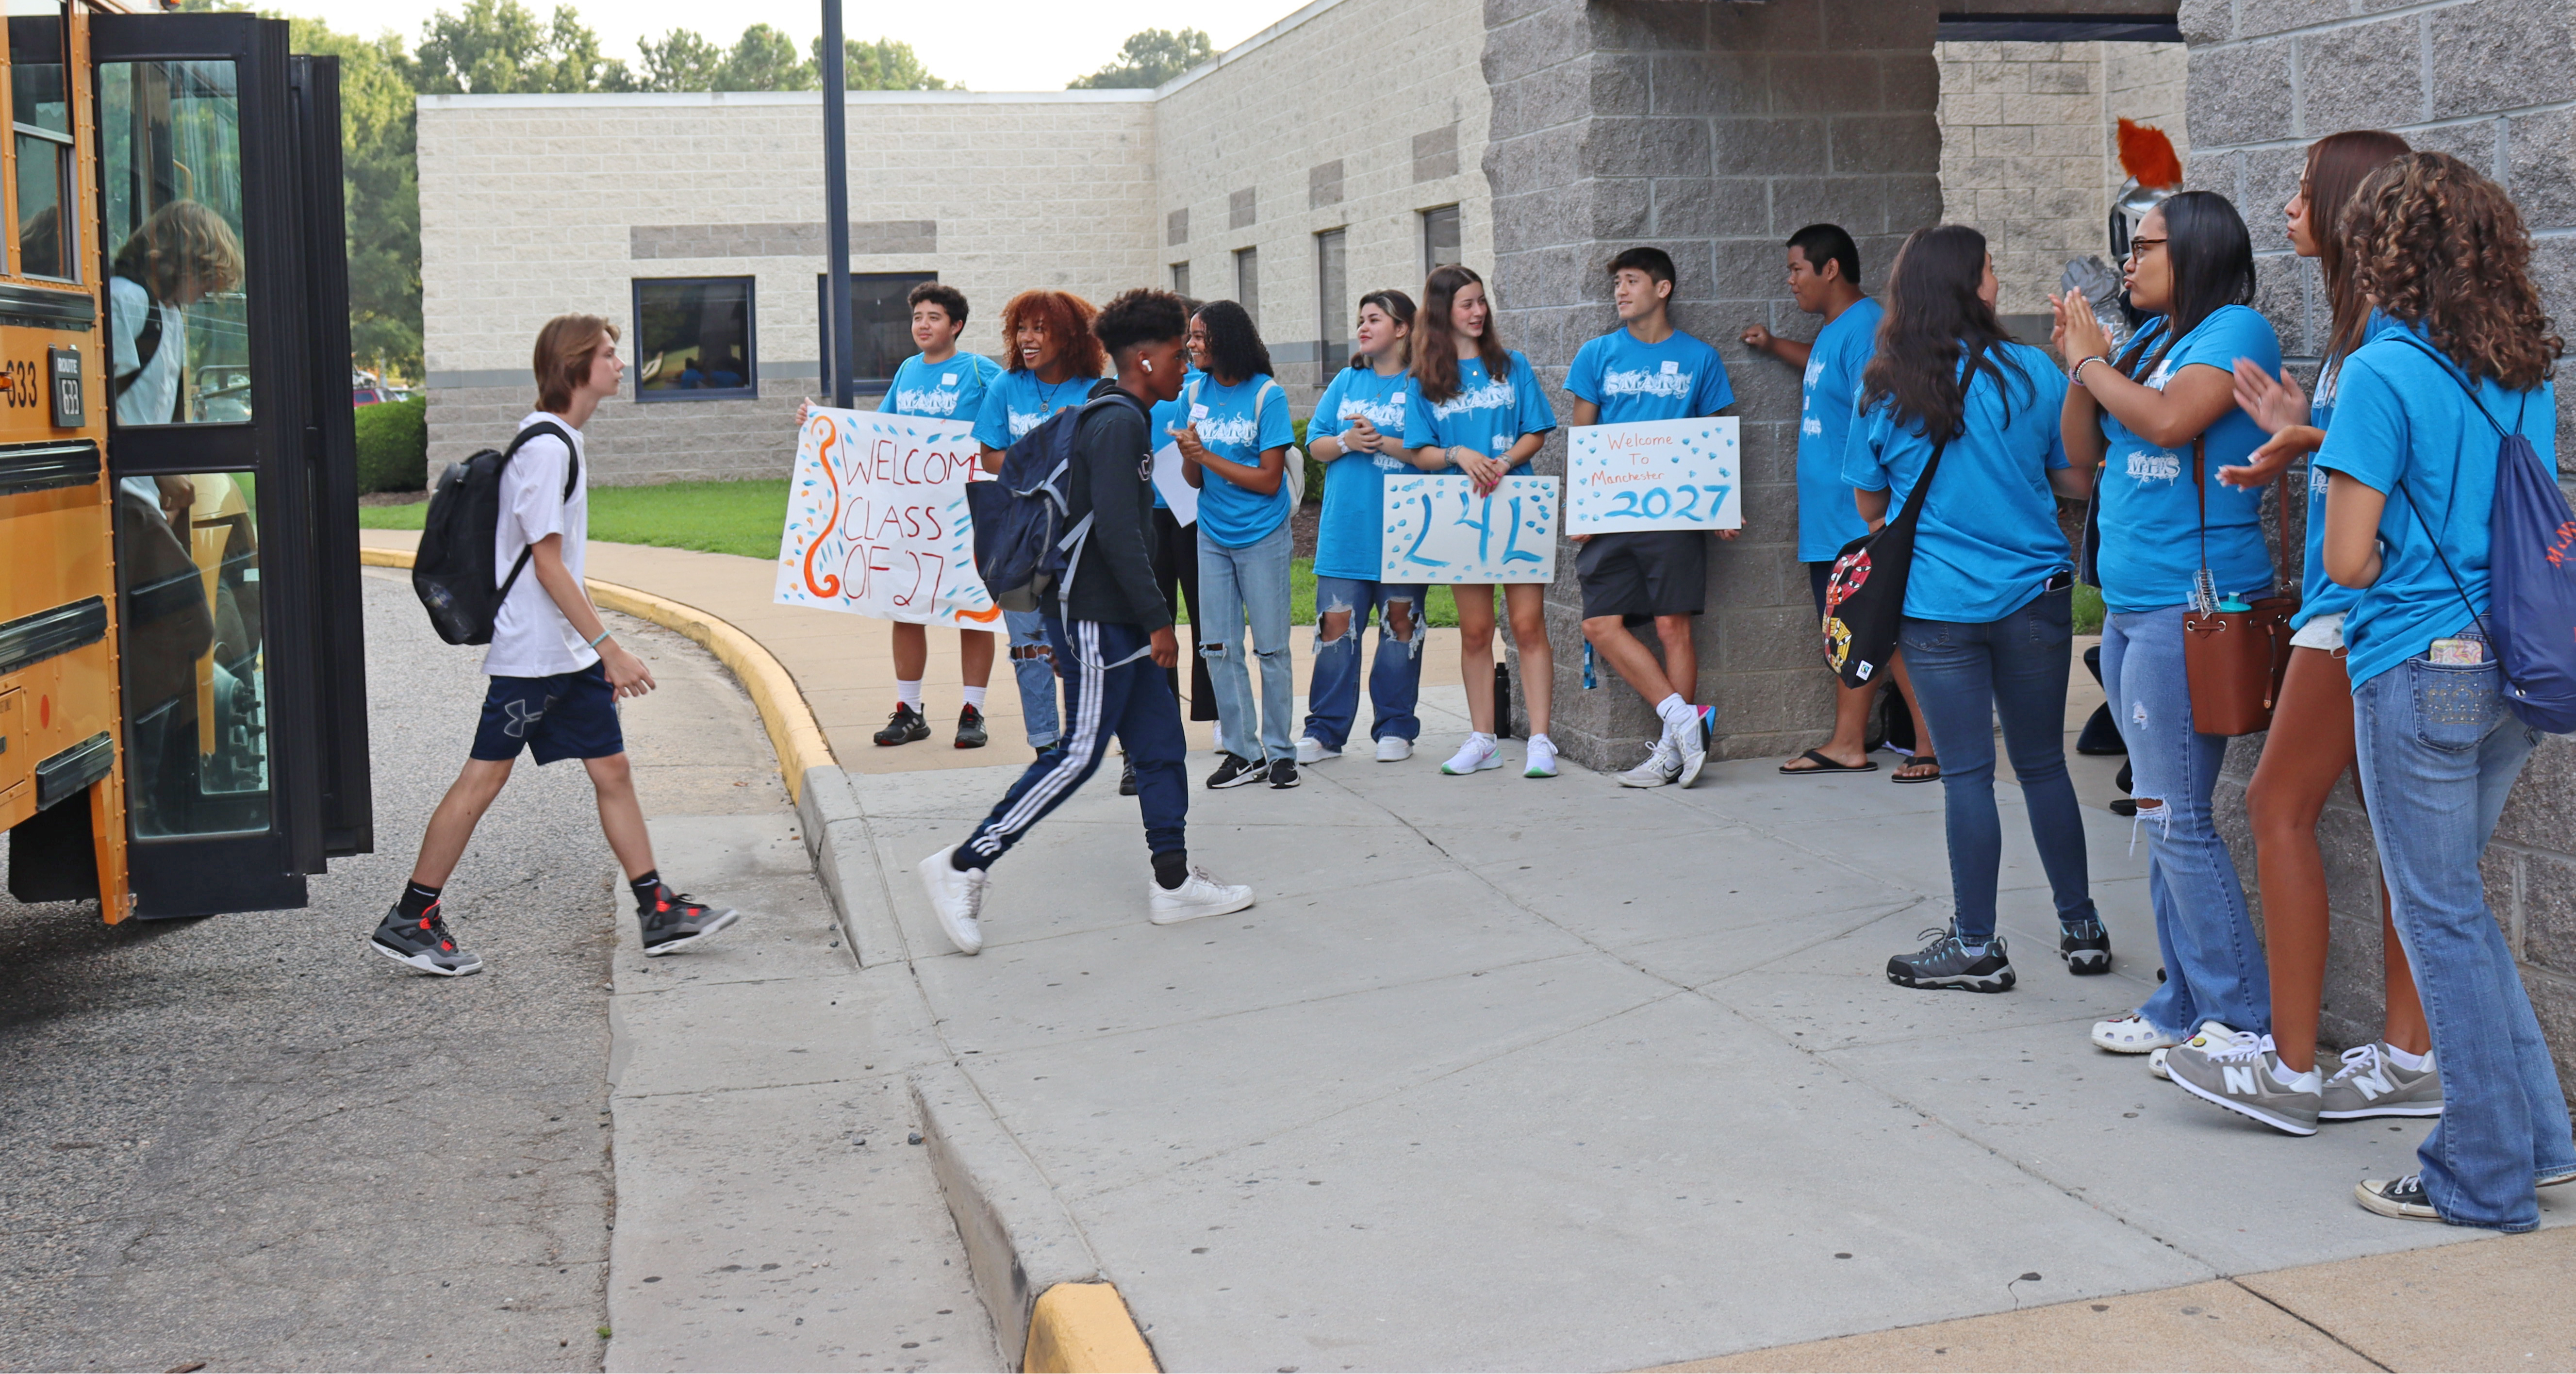 A group of students greeting other students as they enter school